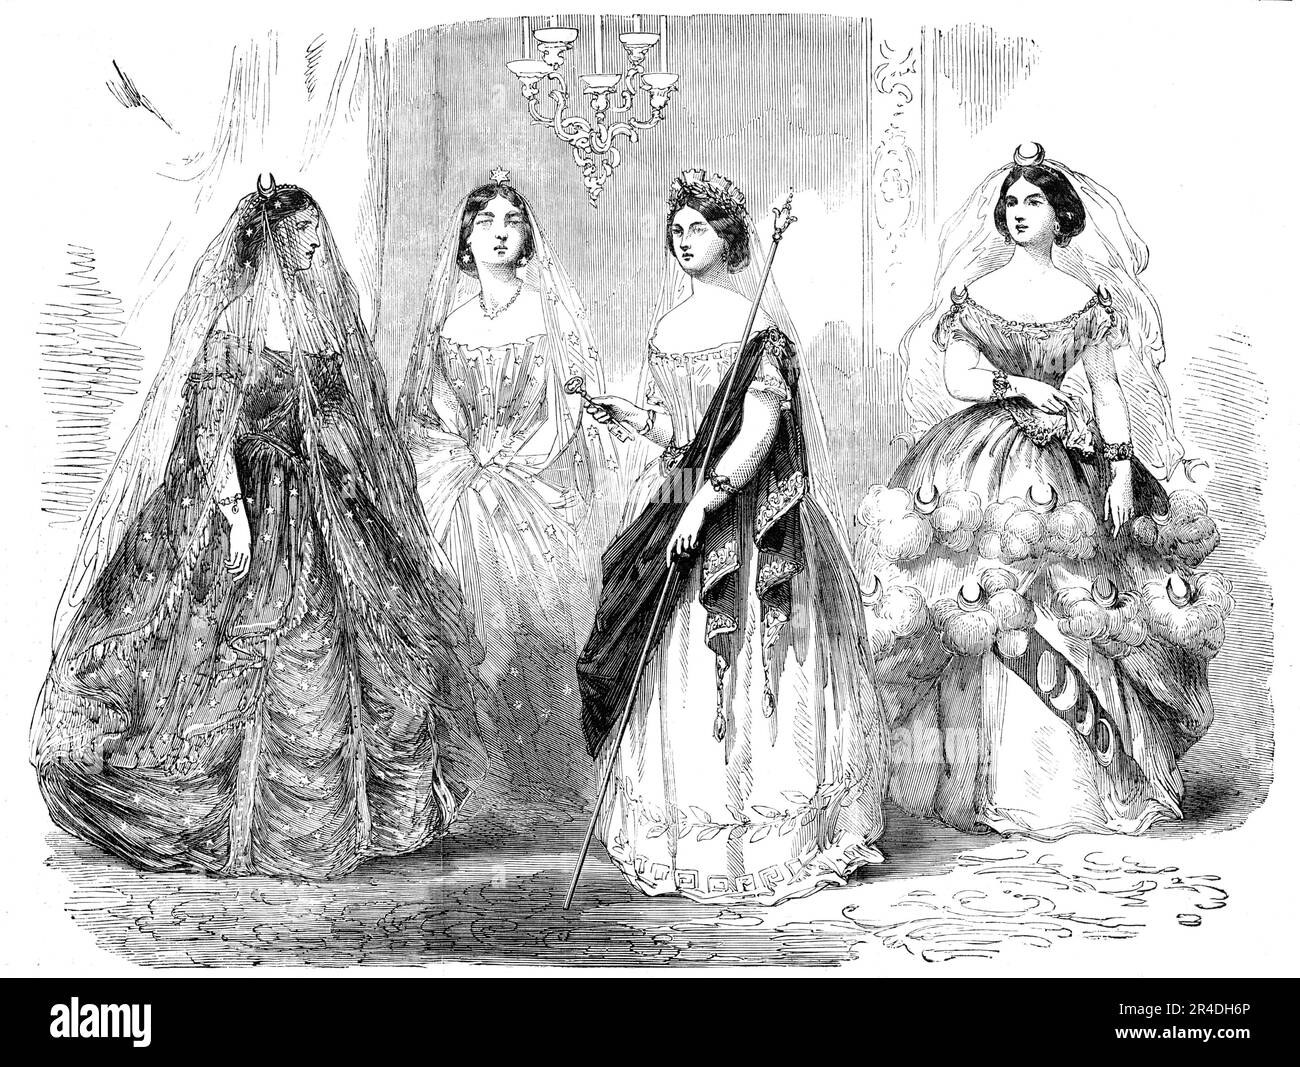 Costumes from the Fancy-Dress Ball, in Aid of the Royal Academy of Music, 1856. '...superb dresses worn by those members of the female aristocracy...The Countess of Jersey as &quot;Night&quot;: dress of dark blue over black, powdered with silver stars, and a veil of dark blue and silver...on her head a wreath of diamond stars; Lady Clementia Villiers, attendant star of &quot;Night&quot;:...a light blue tulle dress, spangled with silver stars, and a large diamond star on her forehead; The Duchess of Manchester as &quot;Cybele&quot;:...dress of the finest white barege de cachmere, embroidered wi Stock Photo